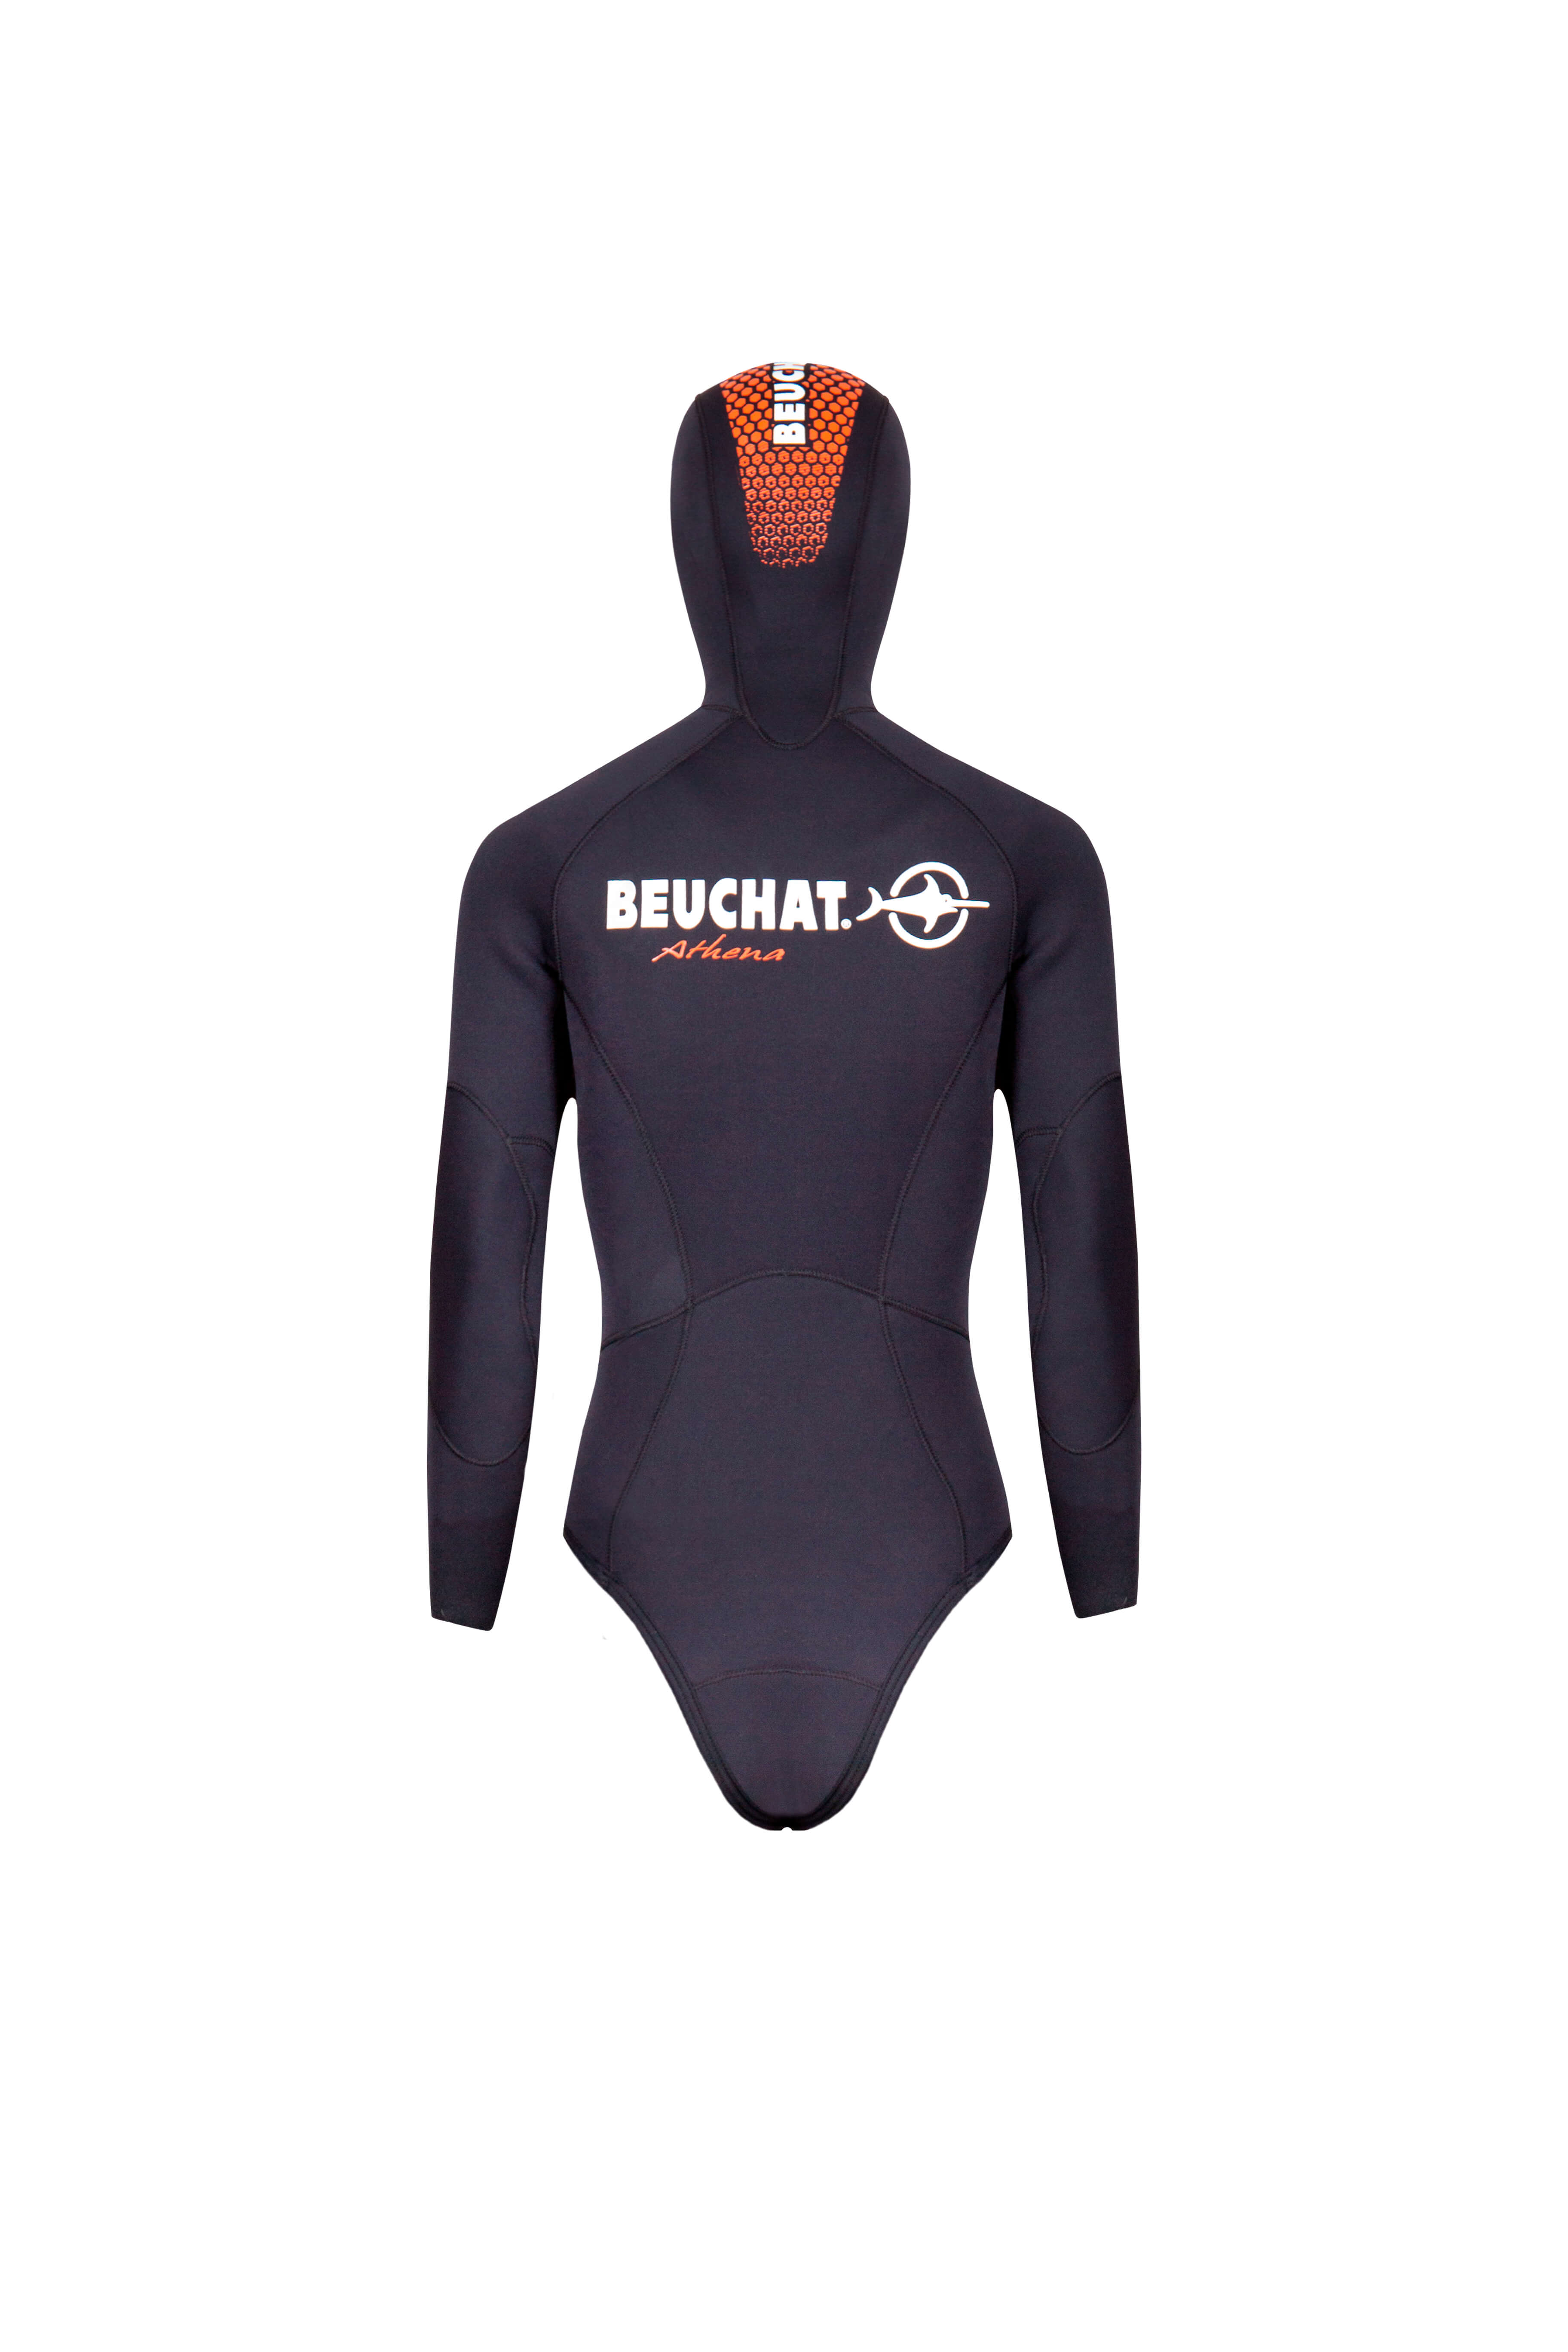 Beuchat Athena 5mm Opencell Jacket – Female